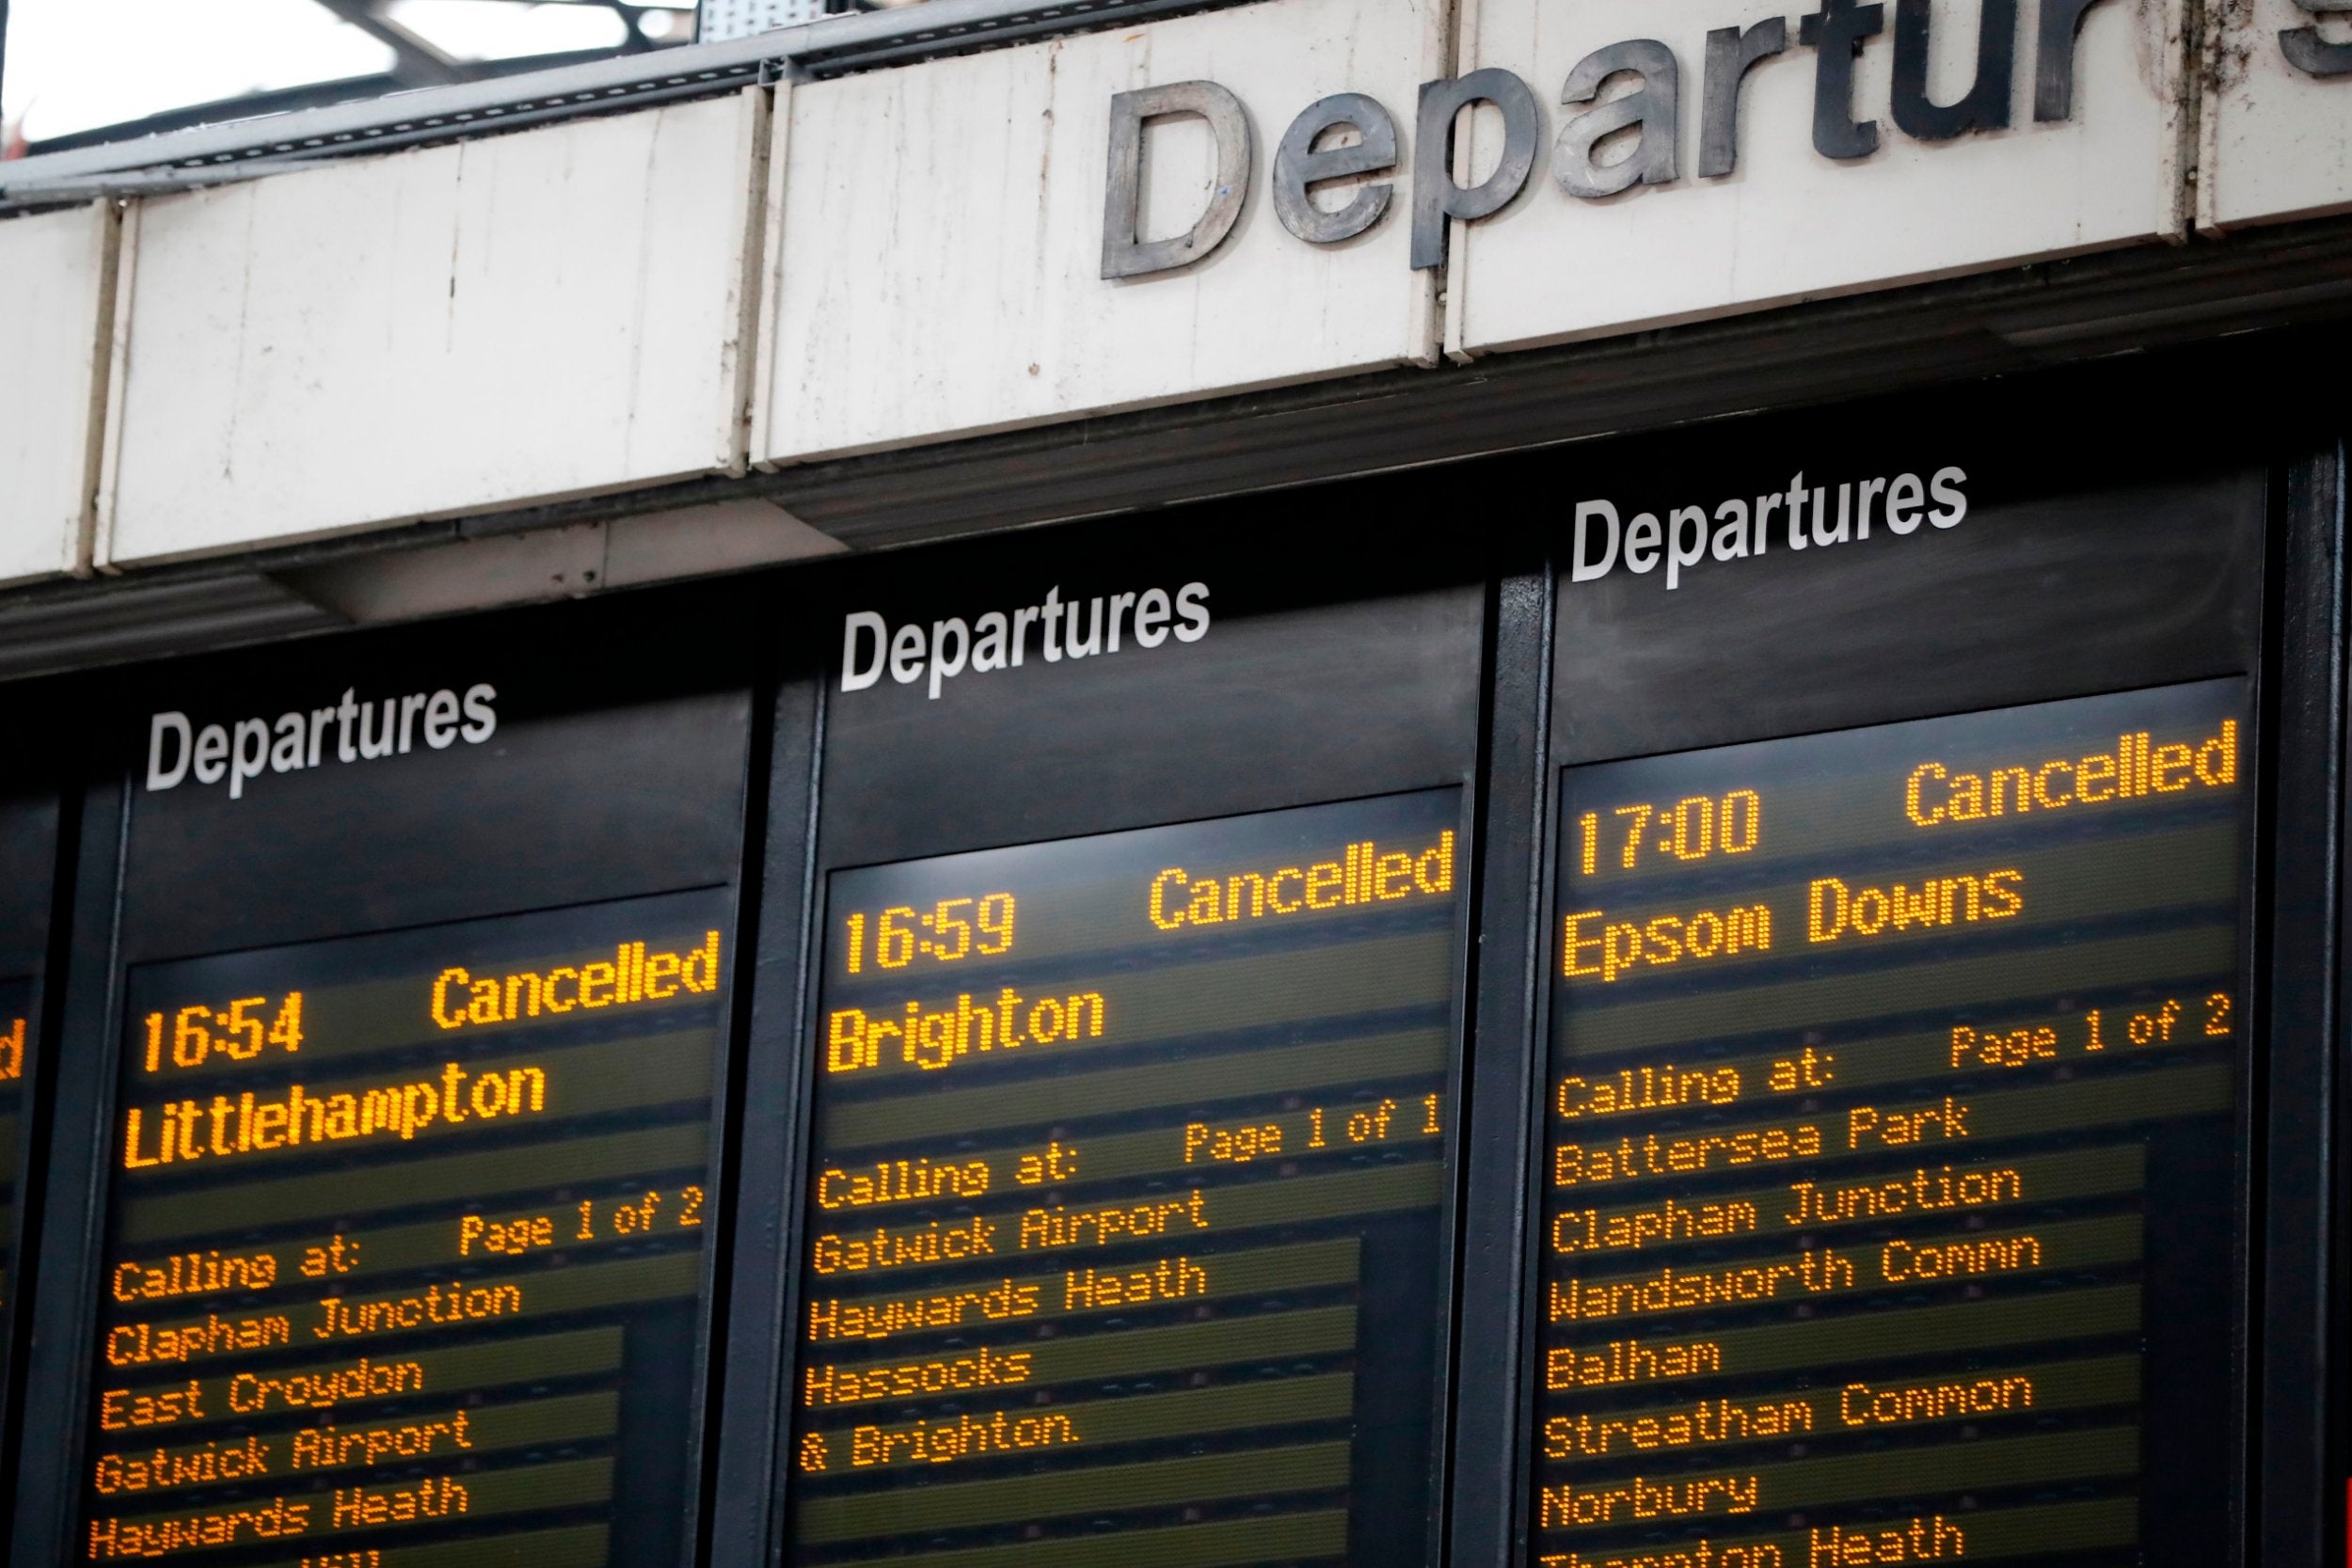 Departure boards at London’s Victoria railway station display a list of cancelled trains